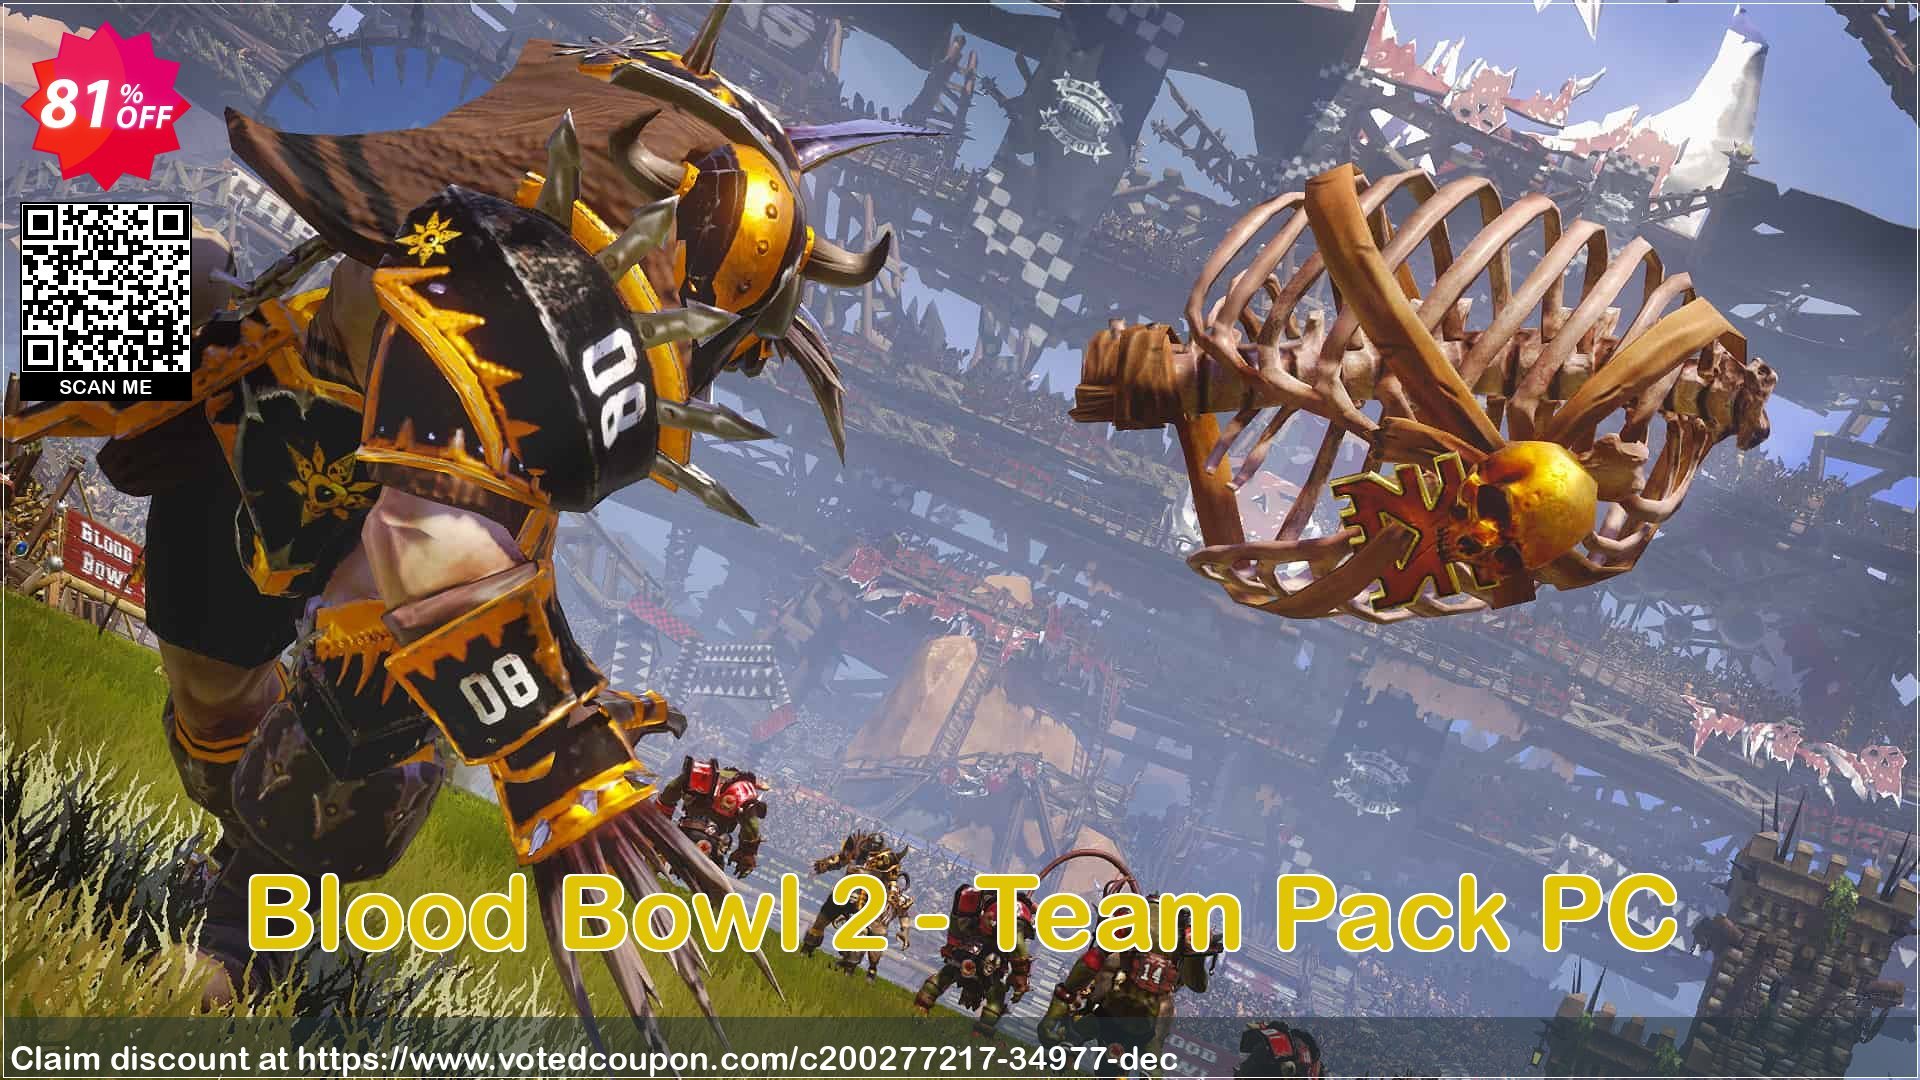 Blood Bowl 2 - Team Pack PC Coupon Code Apr 2024, 81% OFF - VotedCoupon